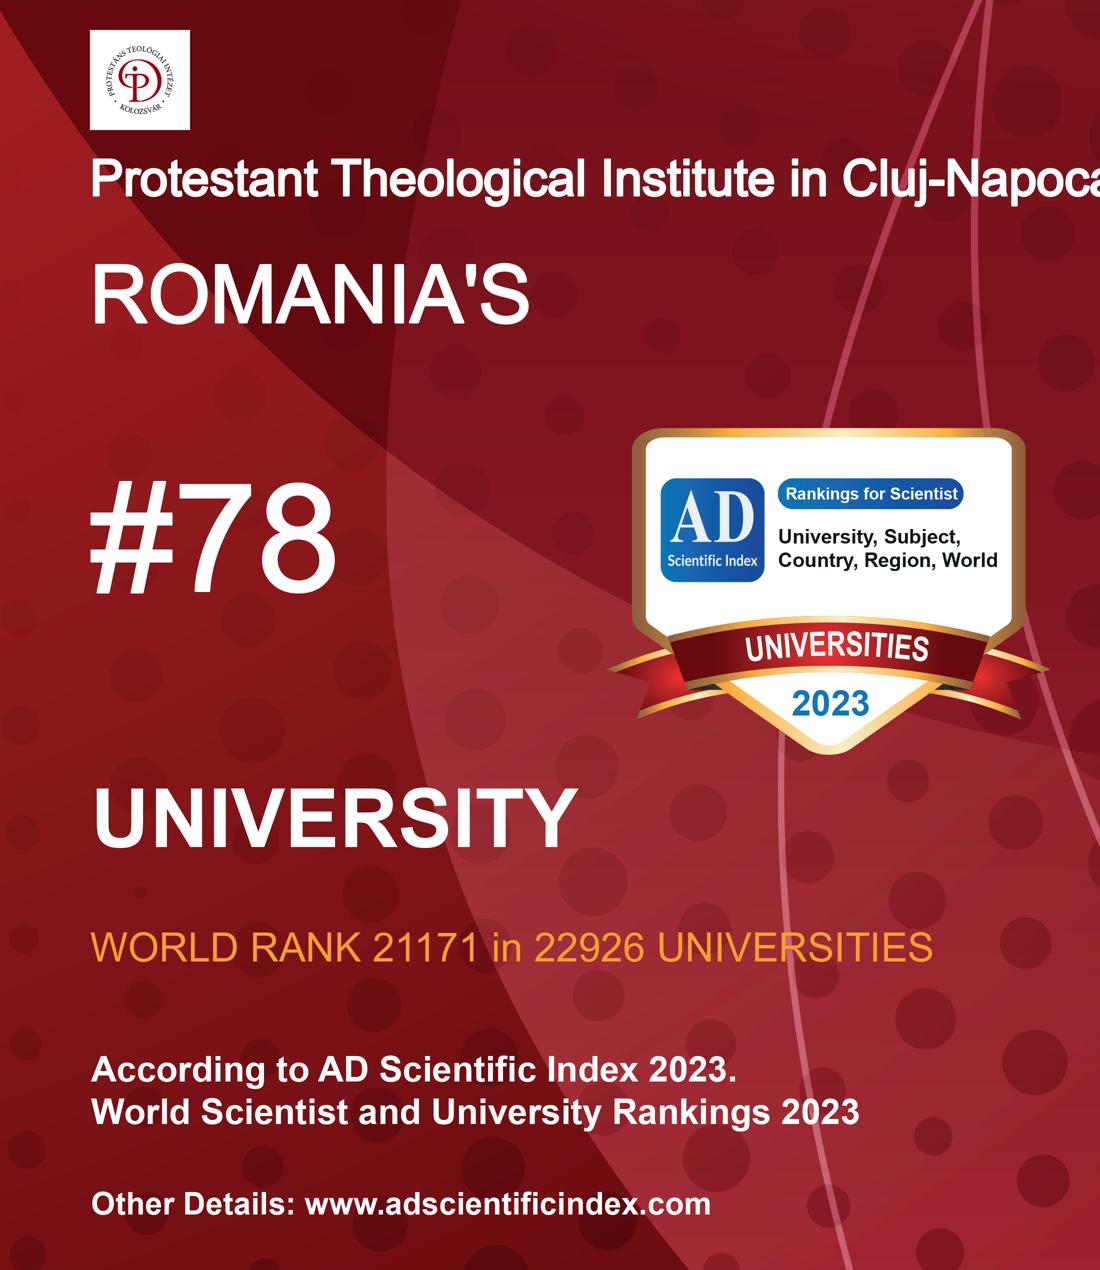 Protestant Theological Institute in Cluj-Napoca